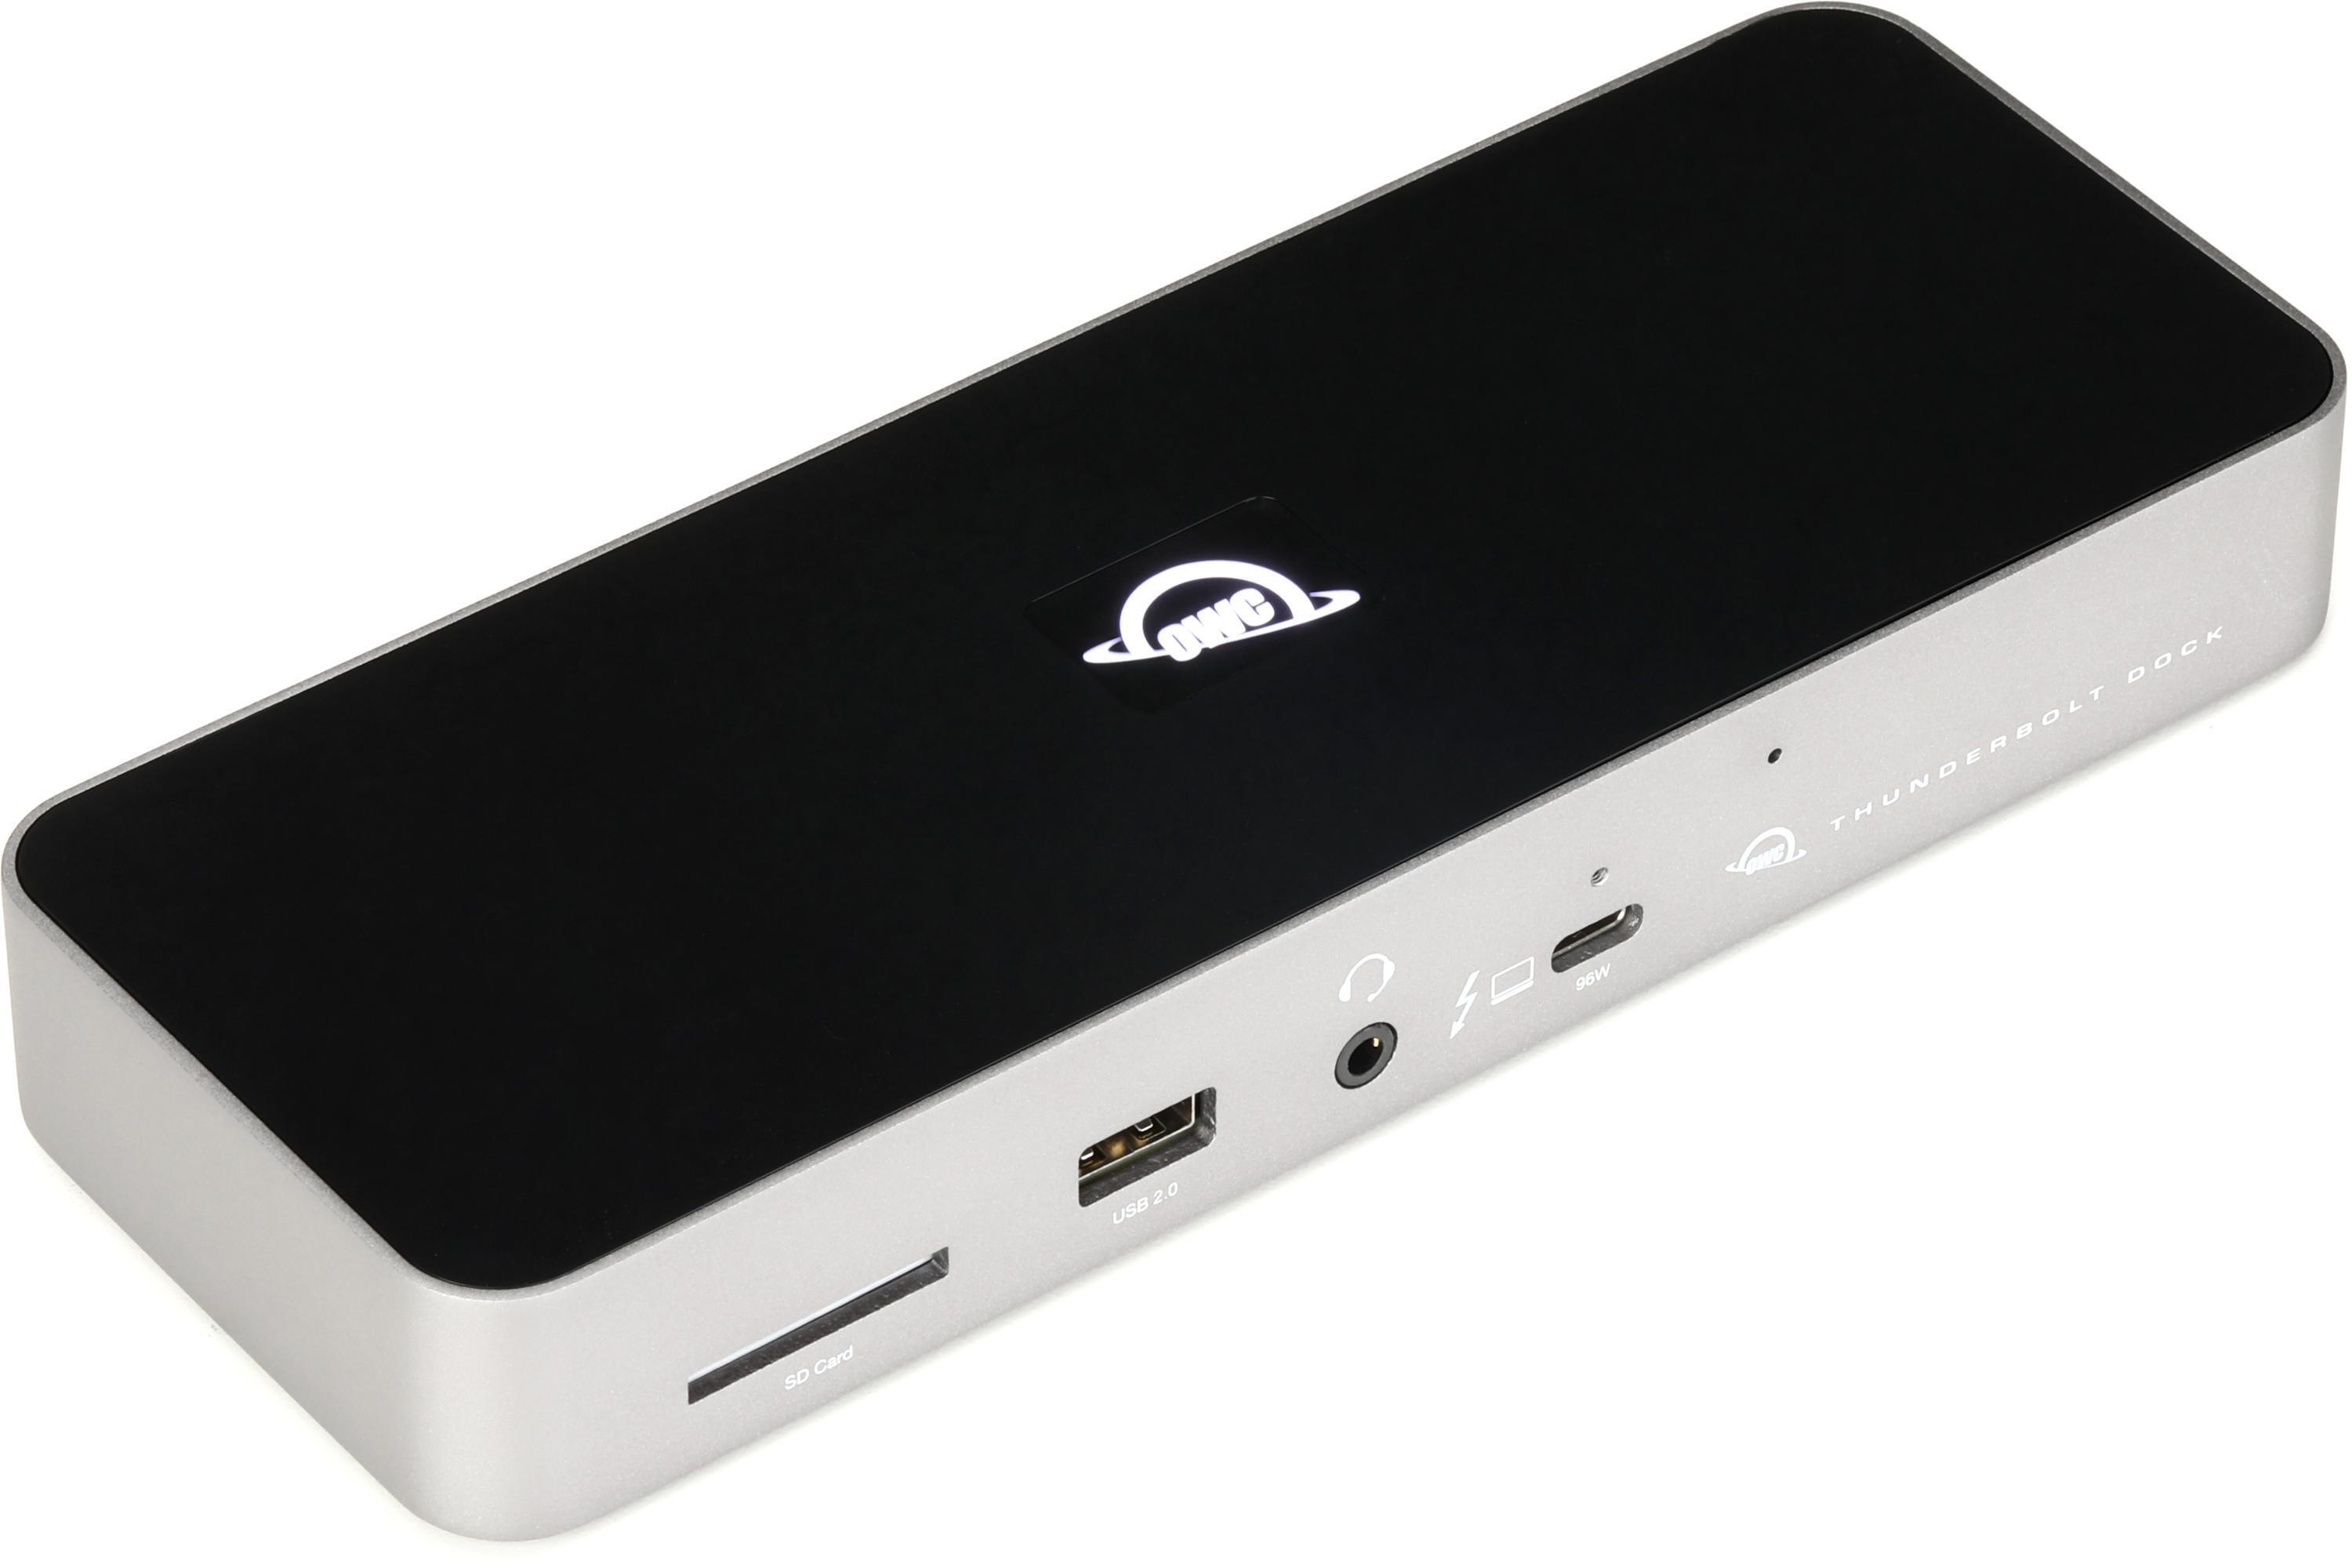 OWC Thunderbolt 4 Dock | Sweetwater